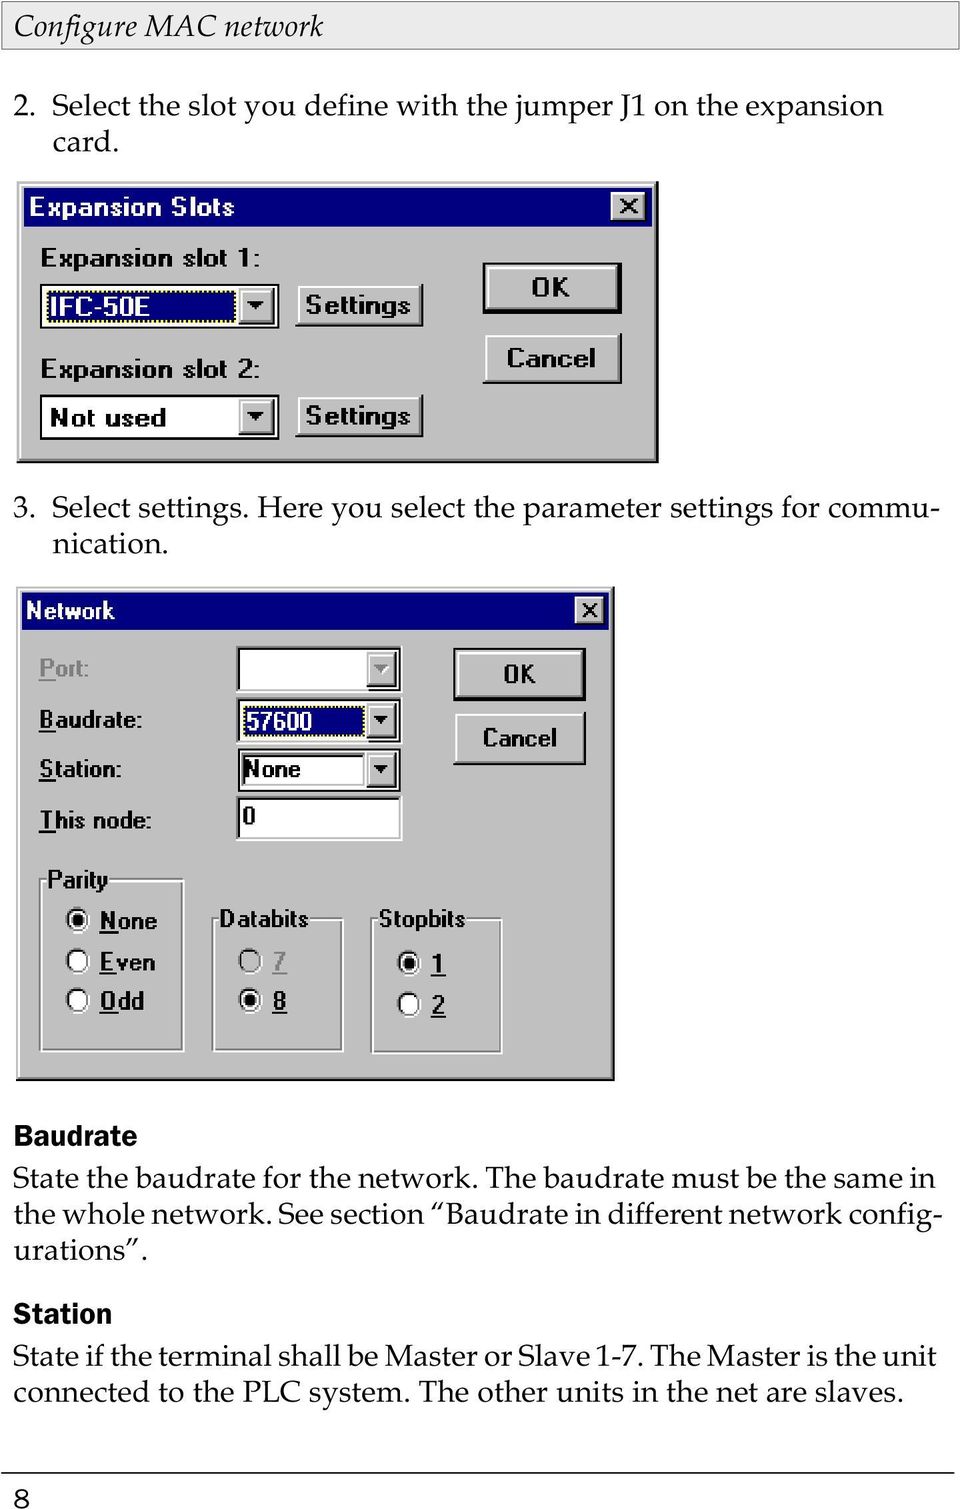 The baudrate must be the same in the whole network. See section Baudrate in different network configurations.